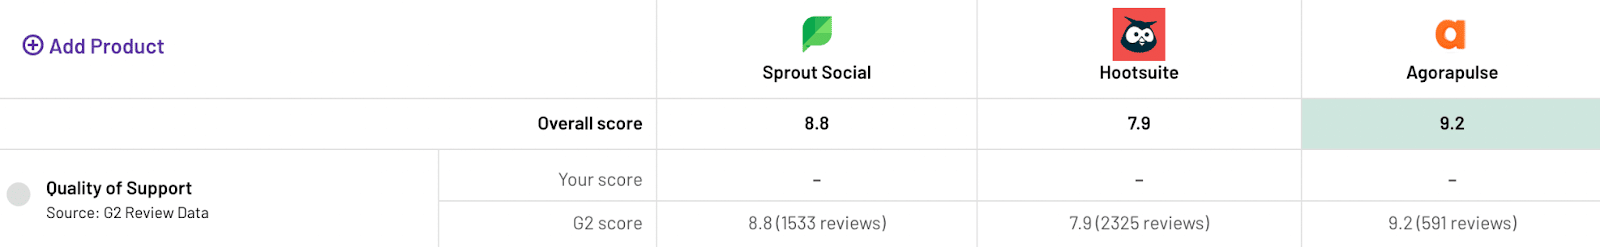 customer care best from agorapulse or sprout social or hootsuite